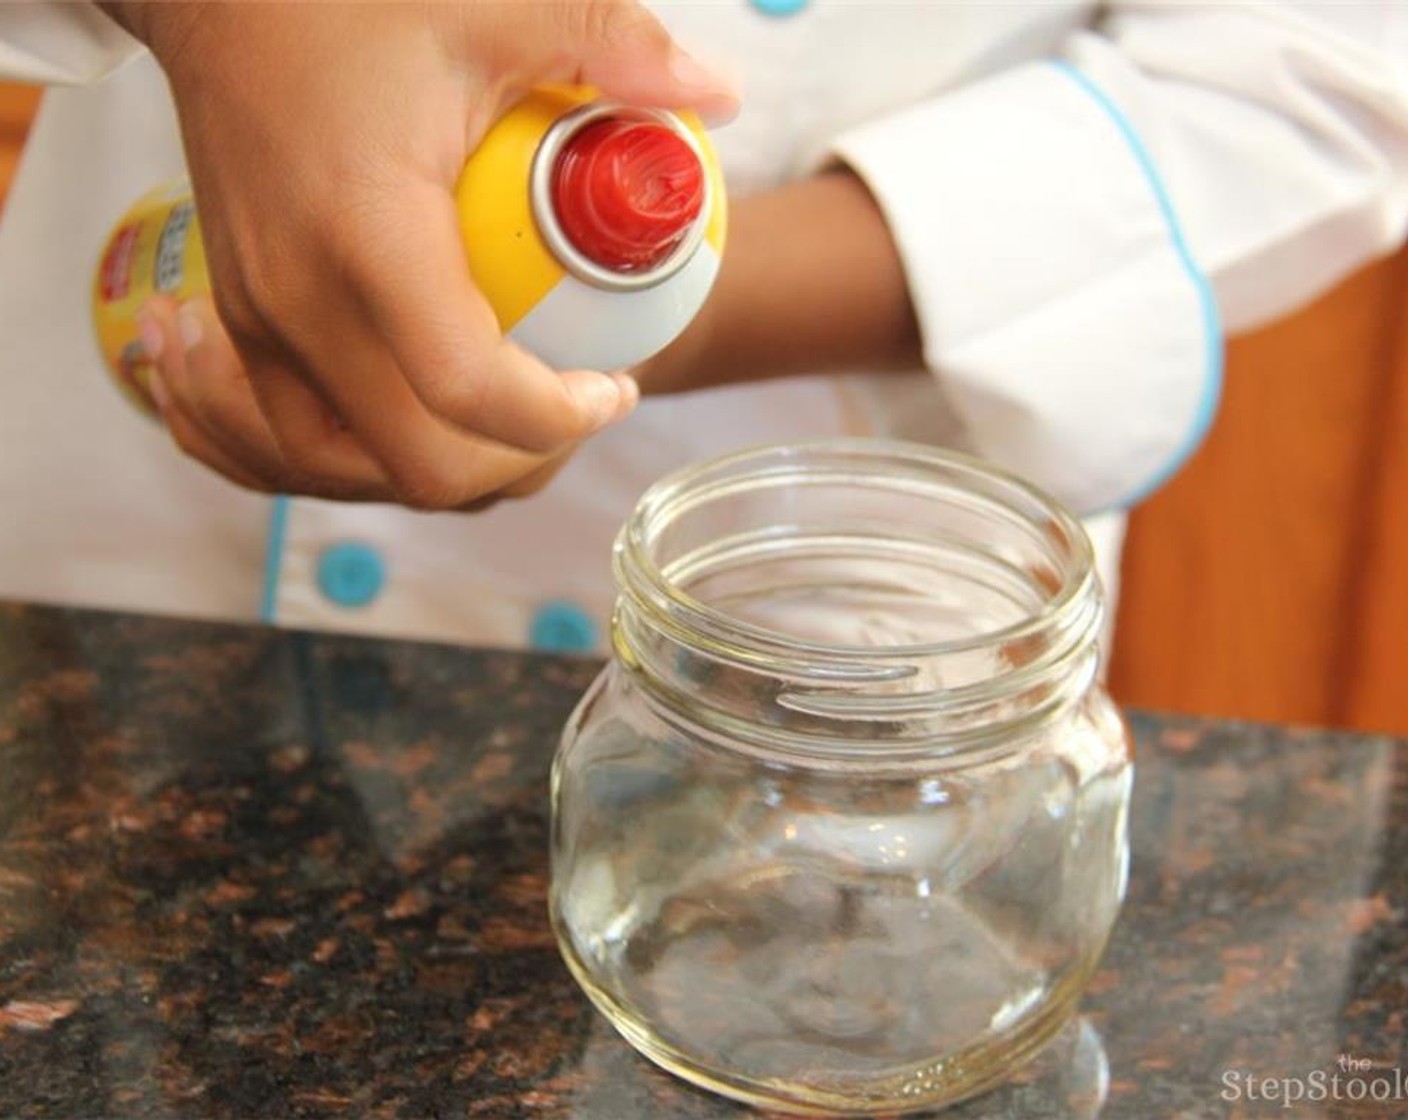 step 1 Preheat the oven to 375 degrees F (190 degrees C), then spray the inside of 3-4 jars with cooking spray.